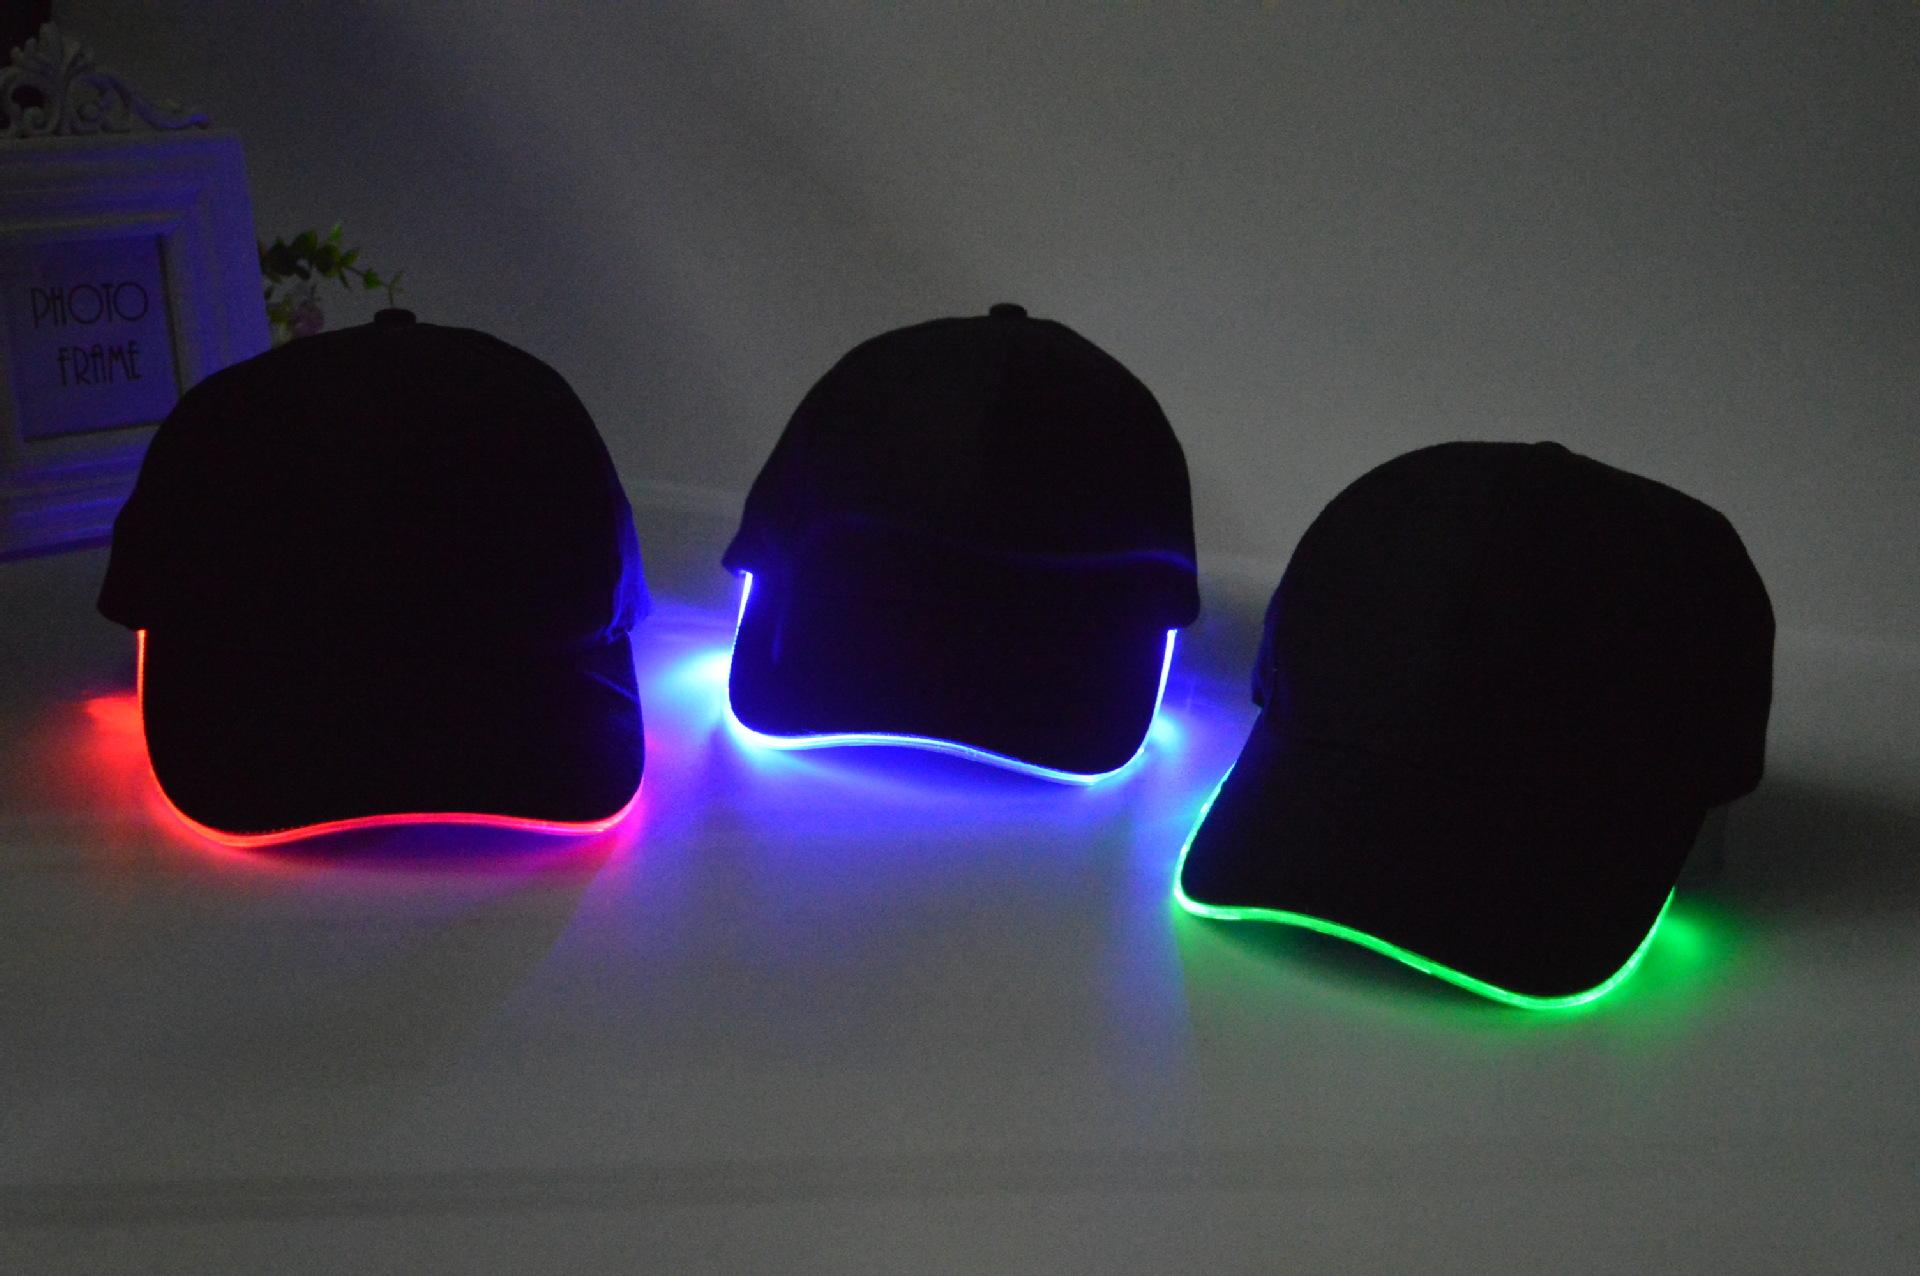 hats with led lights